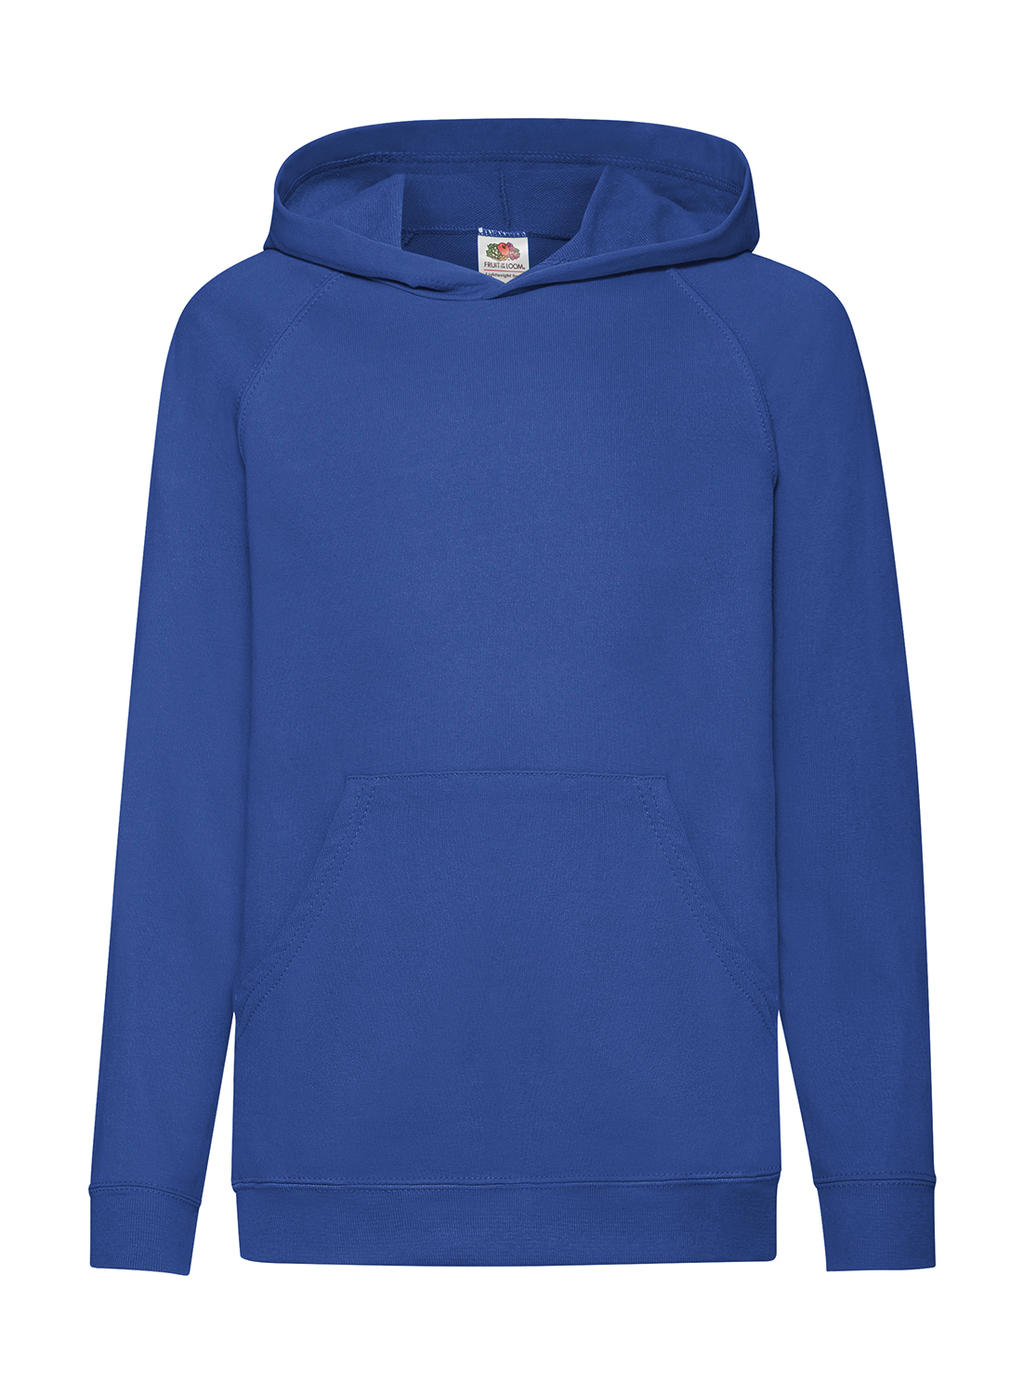  Kids Lightweight Hooded Sweat in Farbe Royal